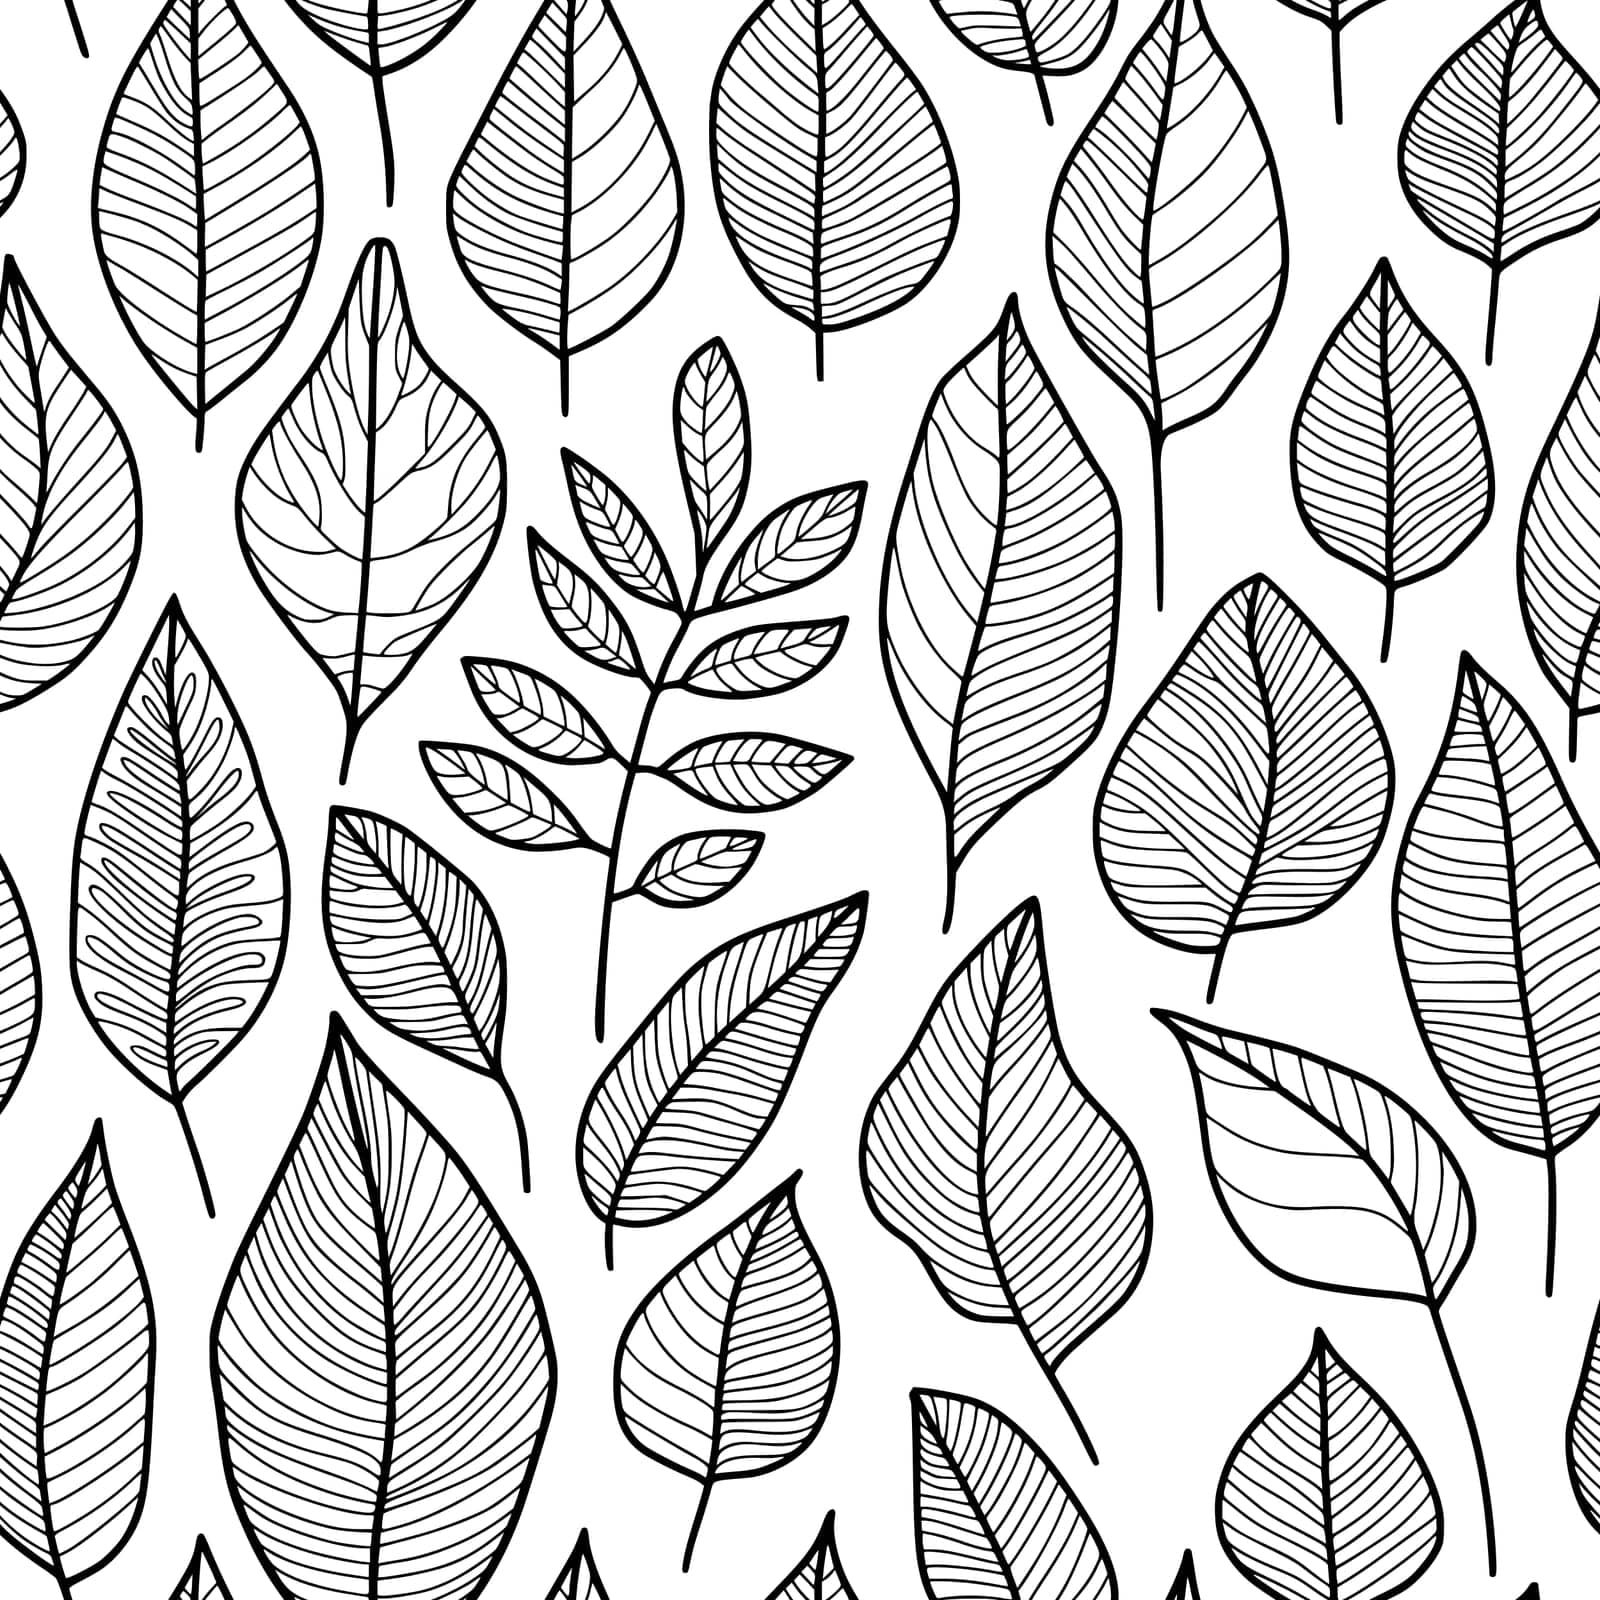 Abstract Leaf Pattern, Black Outline Drawing on a White Background, Floral Repeating Intricate Line Art Wallpaper Design for Printing on Fashion Textile, Fabric, Wrapping Paper, Packaging